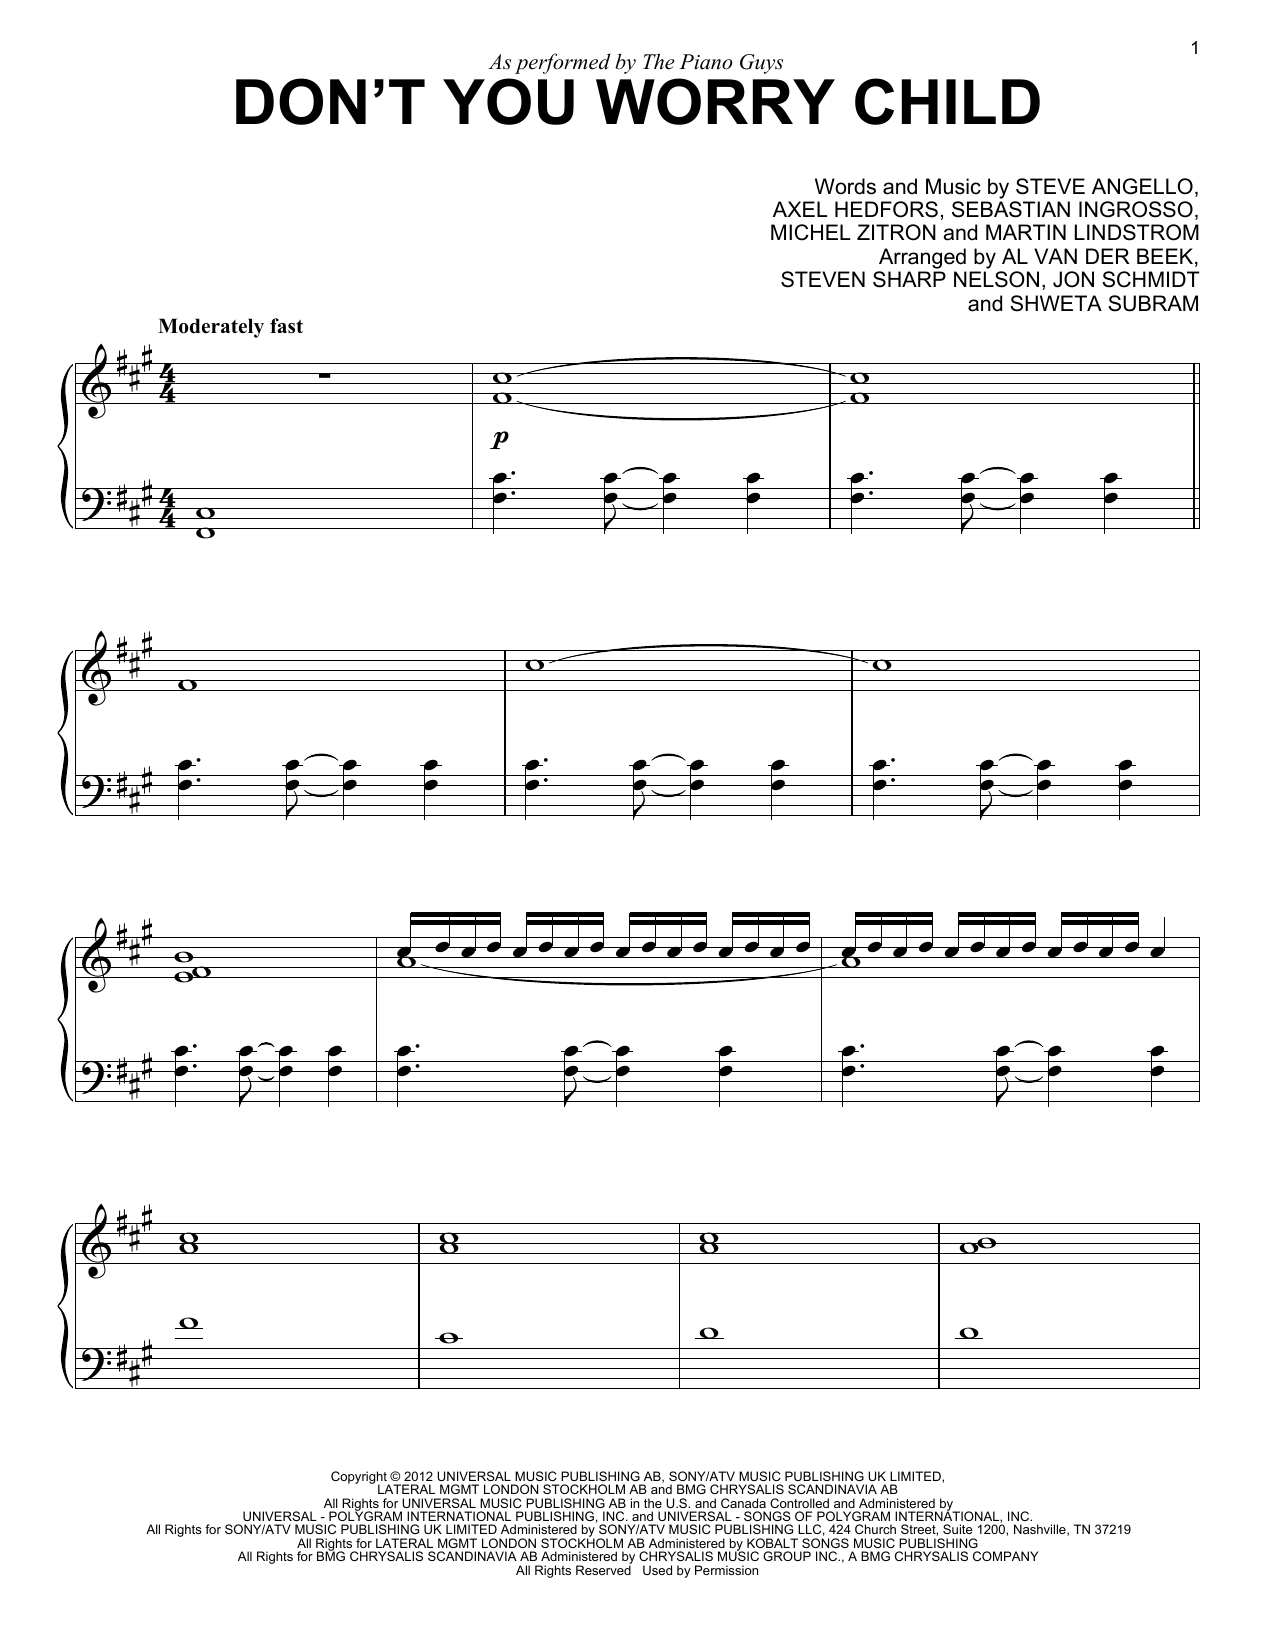 Download The Piano Guys Don't You Worry Child Sheet Music